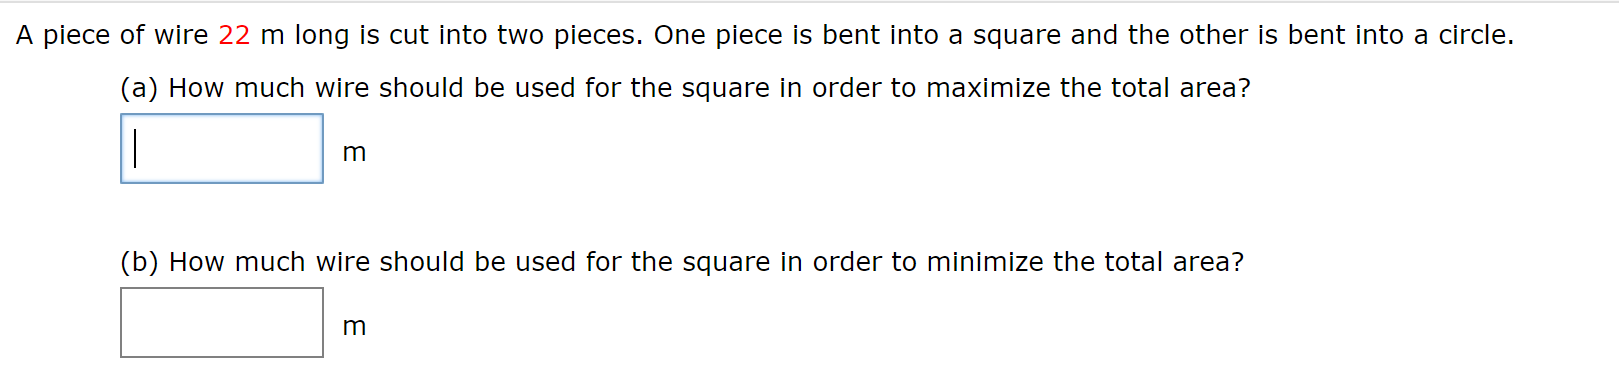 A piece of wire 22 m long is cut into two pieces. One piece is bent into a square and the other is bent into a circle.
(a) How much wire should be used for the square in order to maximize the total area?
|
m
(b) How much wire should be used for the square in order to minimize the total area?
m
